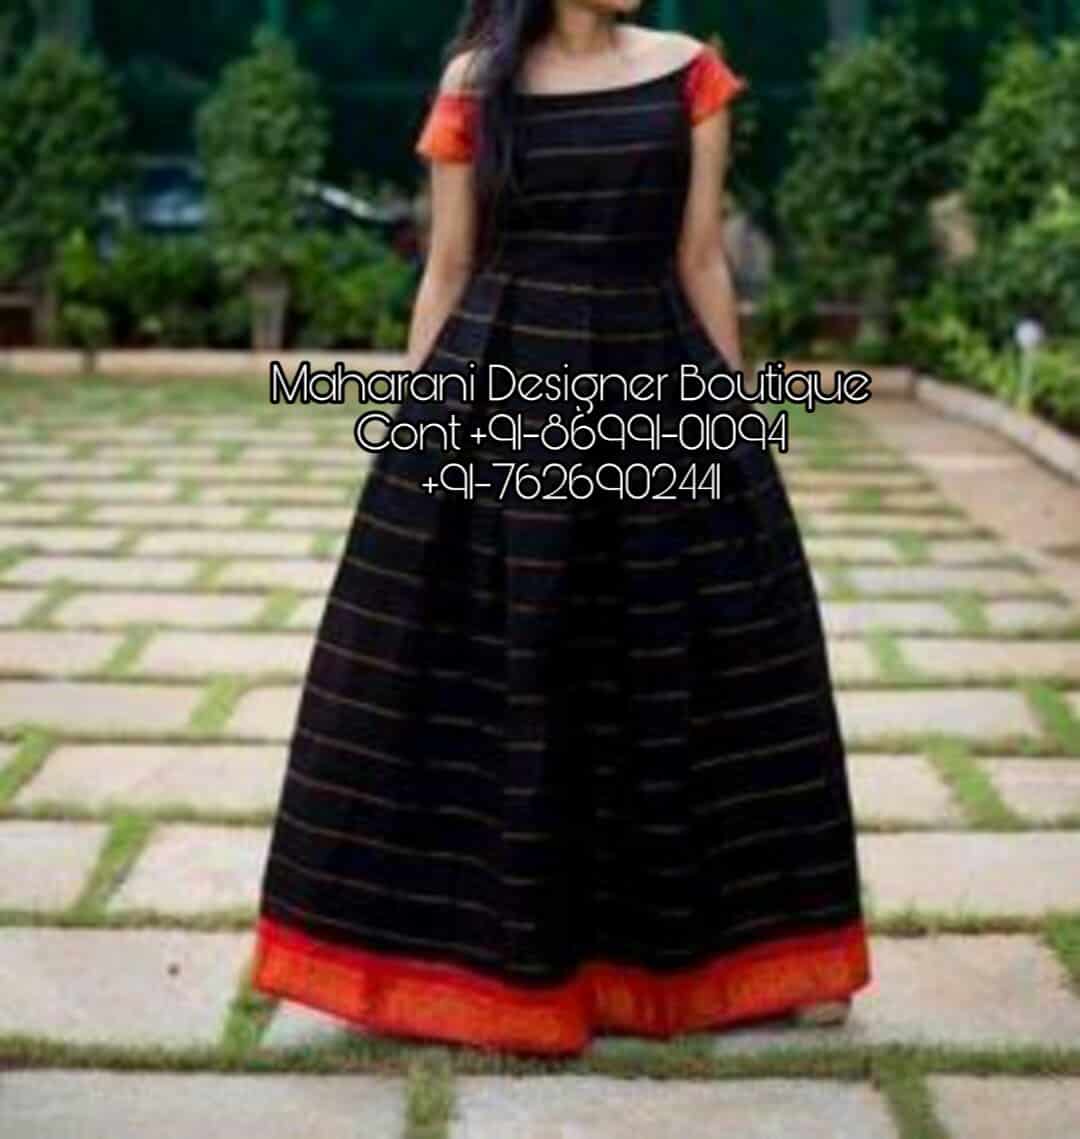 Aglare MaxiDress gown Gown for baby girl MaxiDress gown Gown for baby  girl online MaxiDress gown Gown Black  Online Shoping  Lehenga choli  Online  Lehenga choli for girls  Lehenga